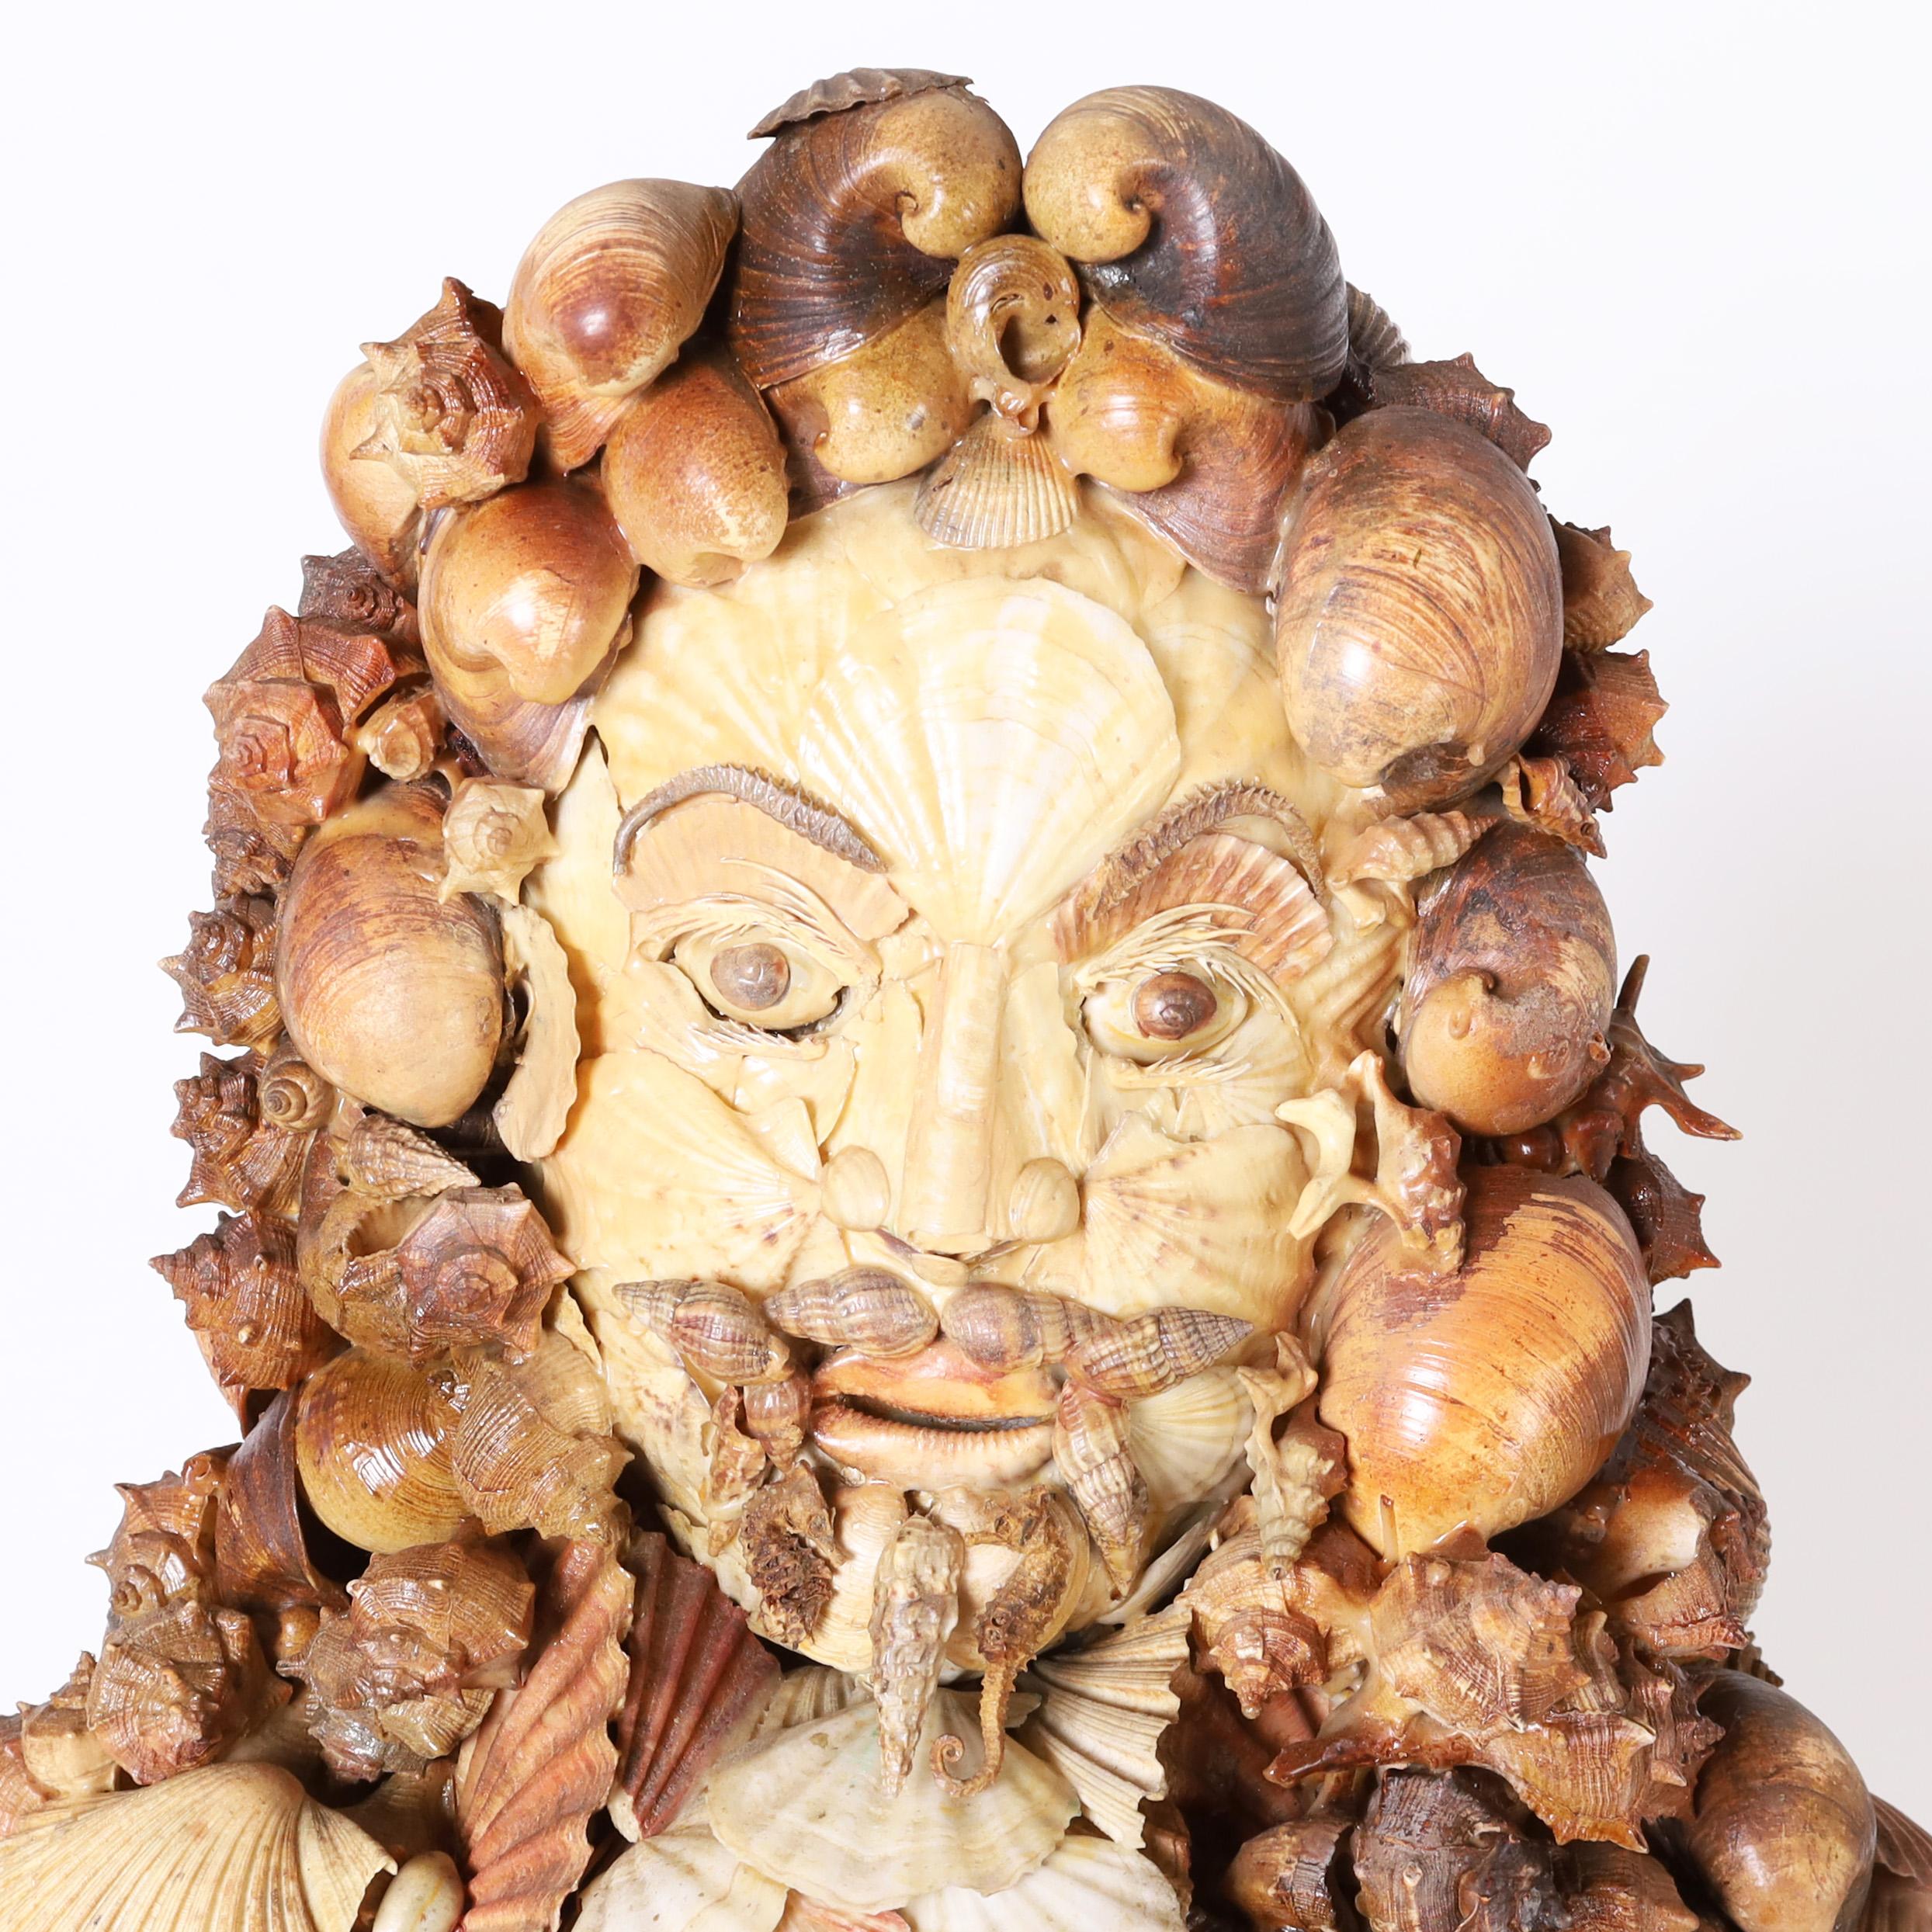 Whimsical Italian seashell encrusted bust with an eccentric composition depicting an 18th century dashing figure of a man complete with mustache and goatee. Presented on a custom wood and composition pedestal decorated with a fishing net.

Pedestal: